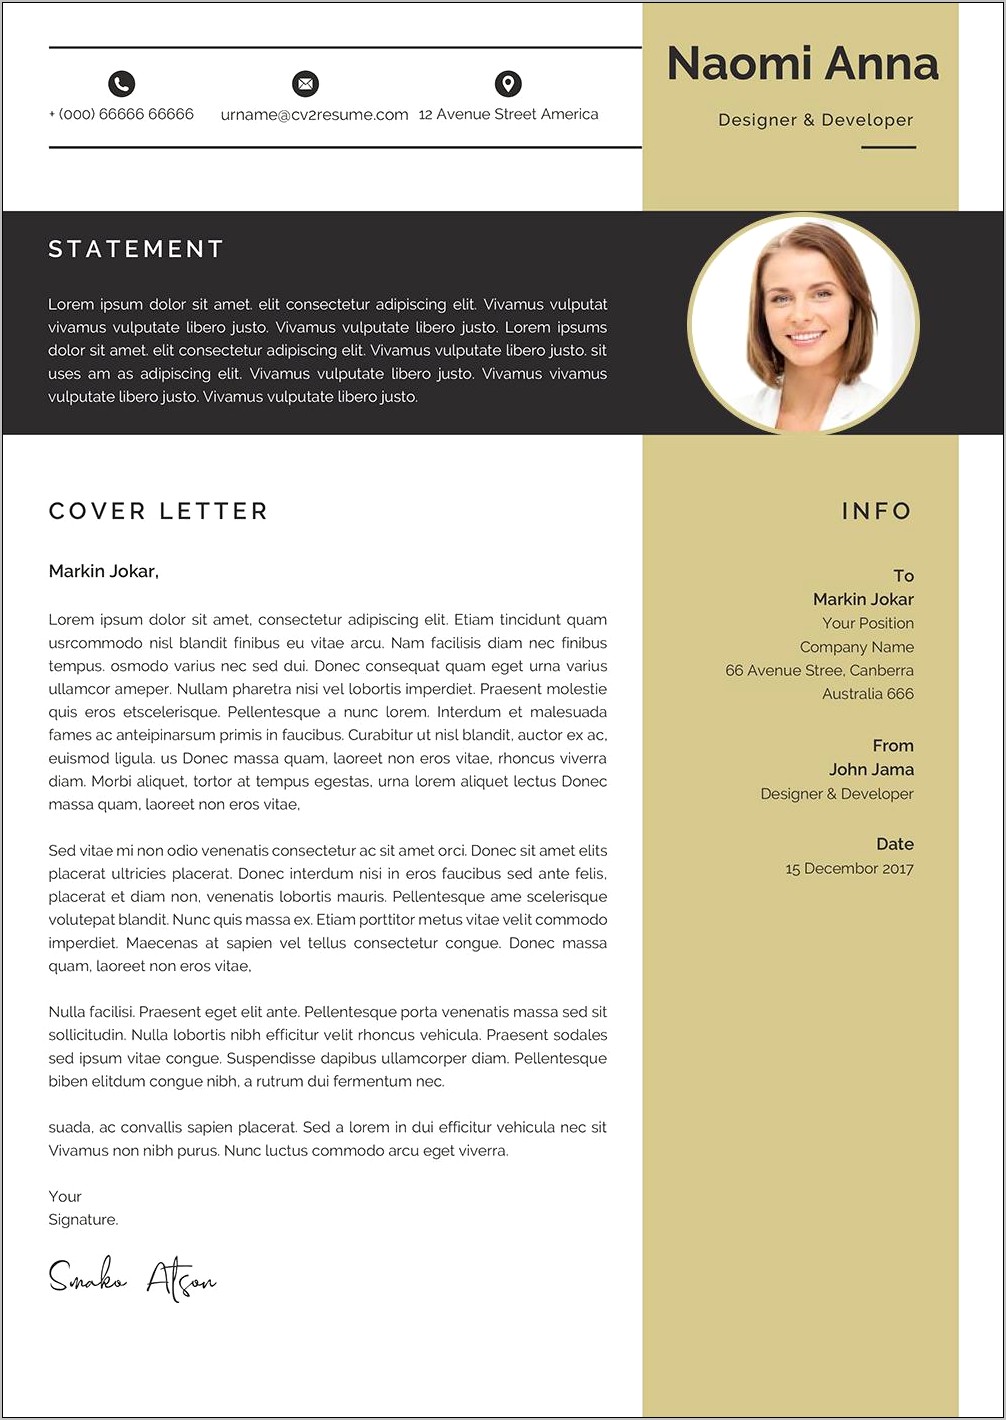 Resume And Cover Letter Templates Australia